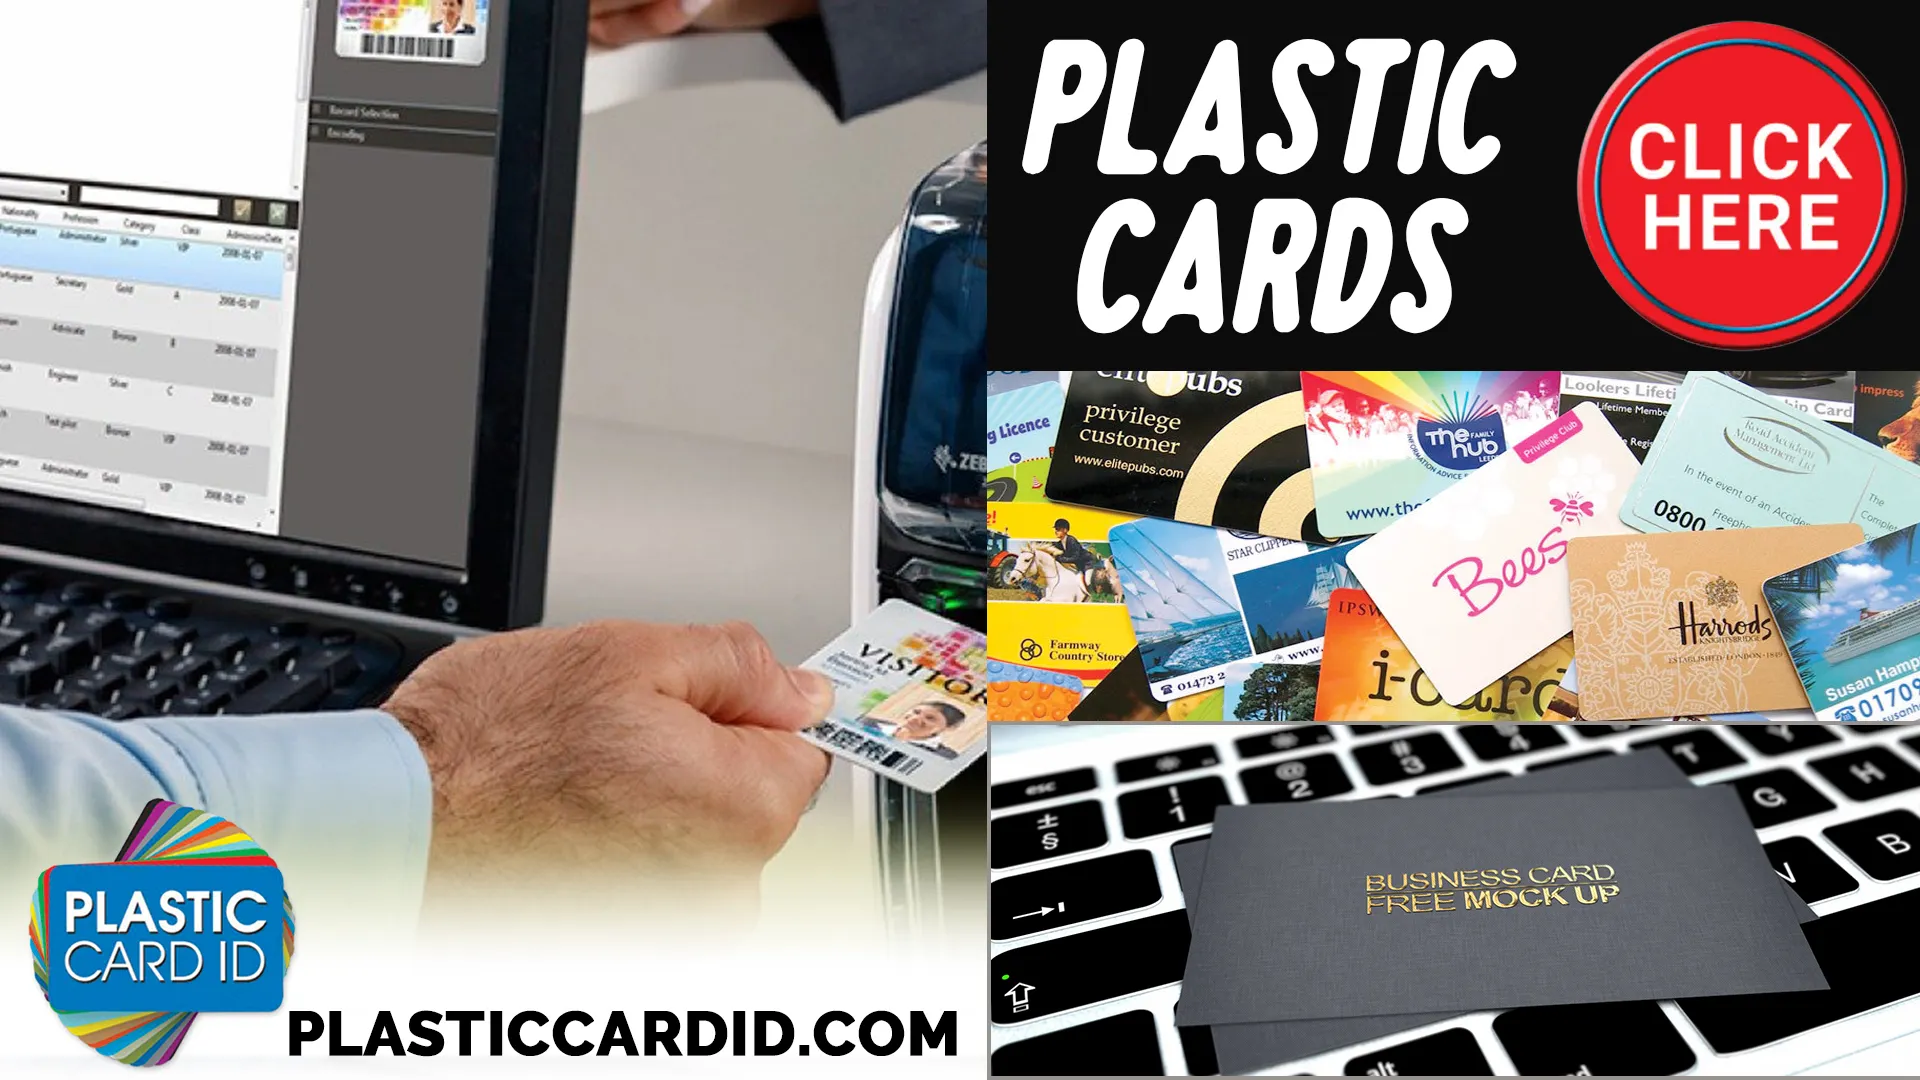 Card Printers and Refill Supplies at Your Fingertips